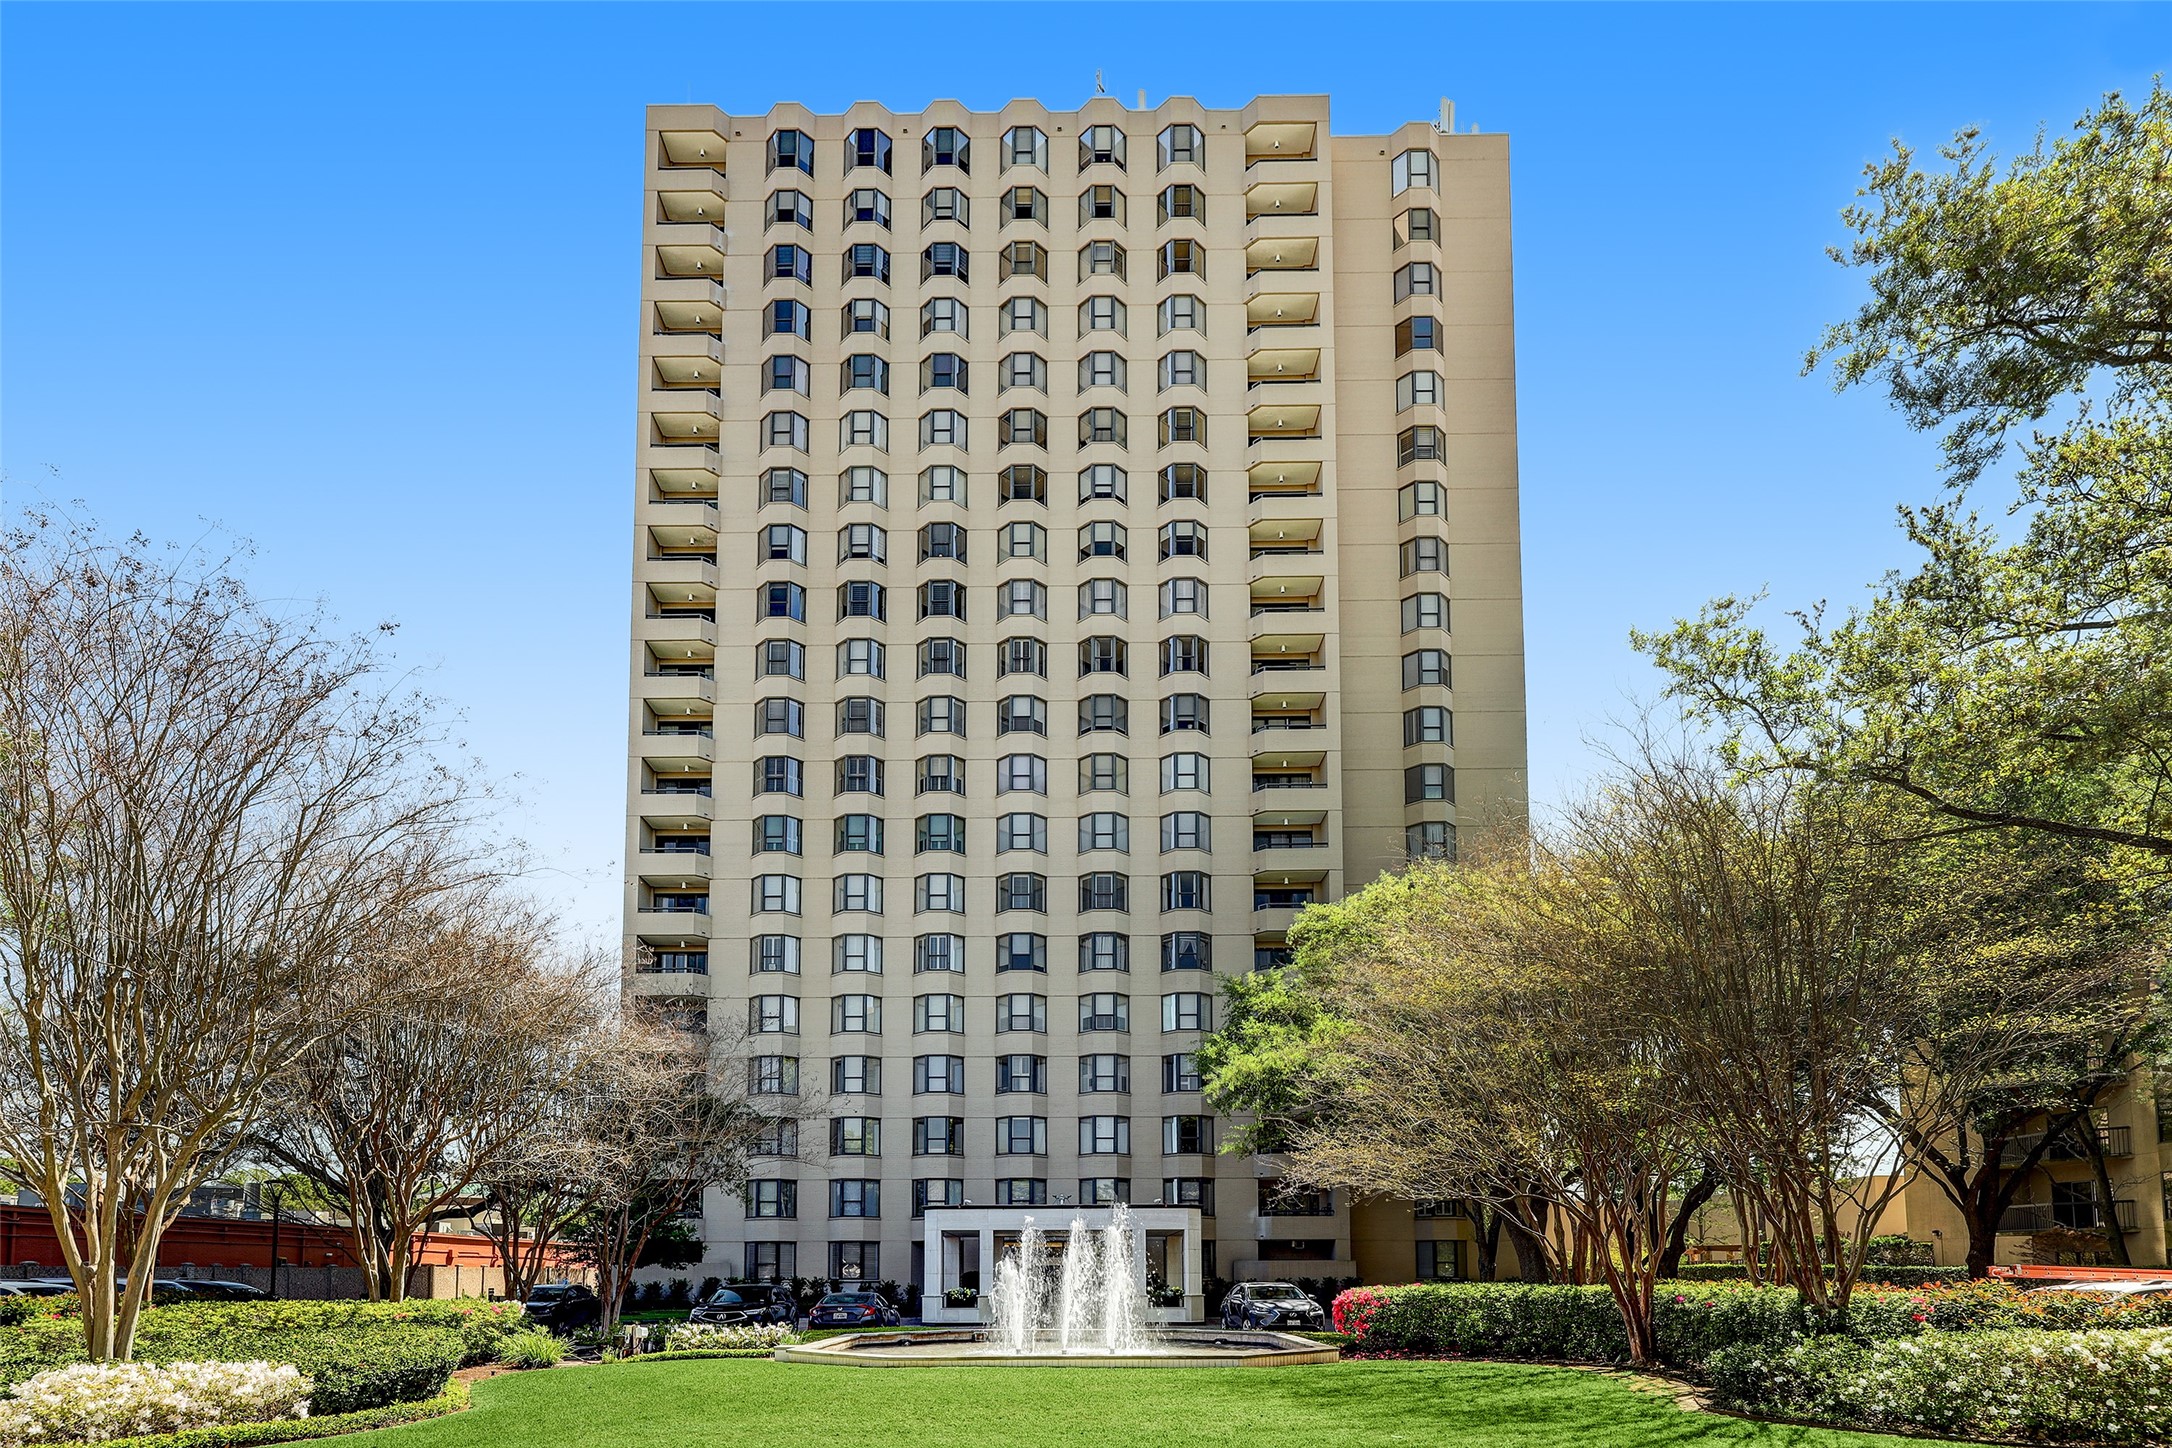 High-Rise with Fountain and Guest Parking in Front.